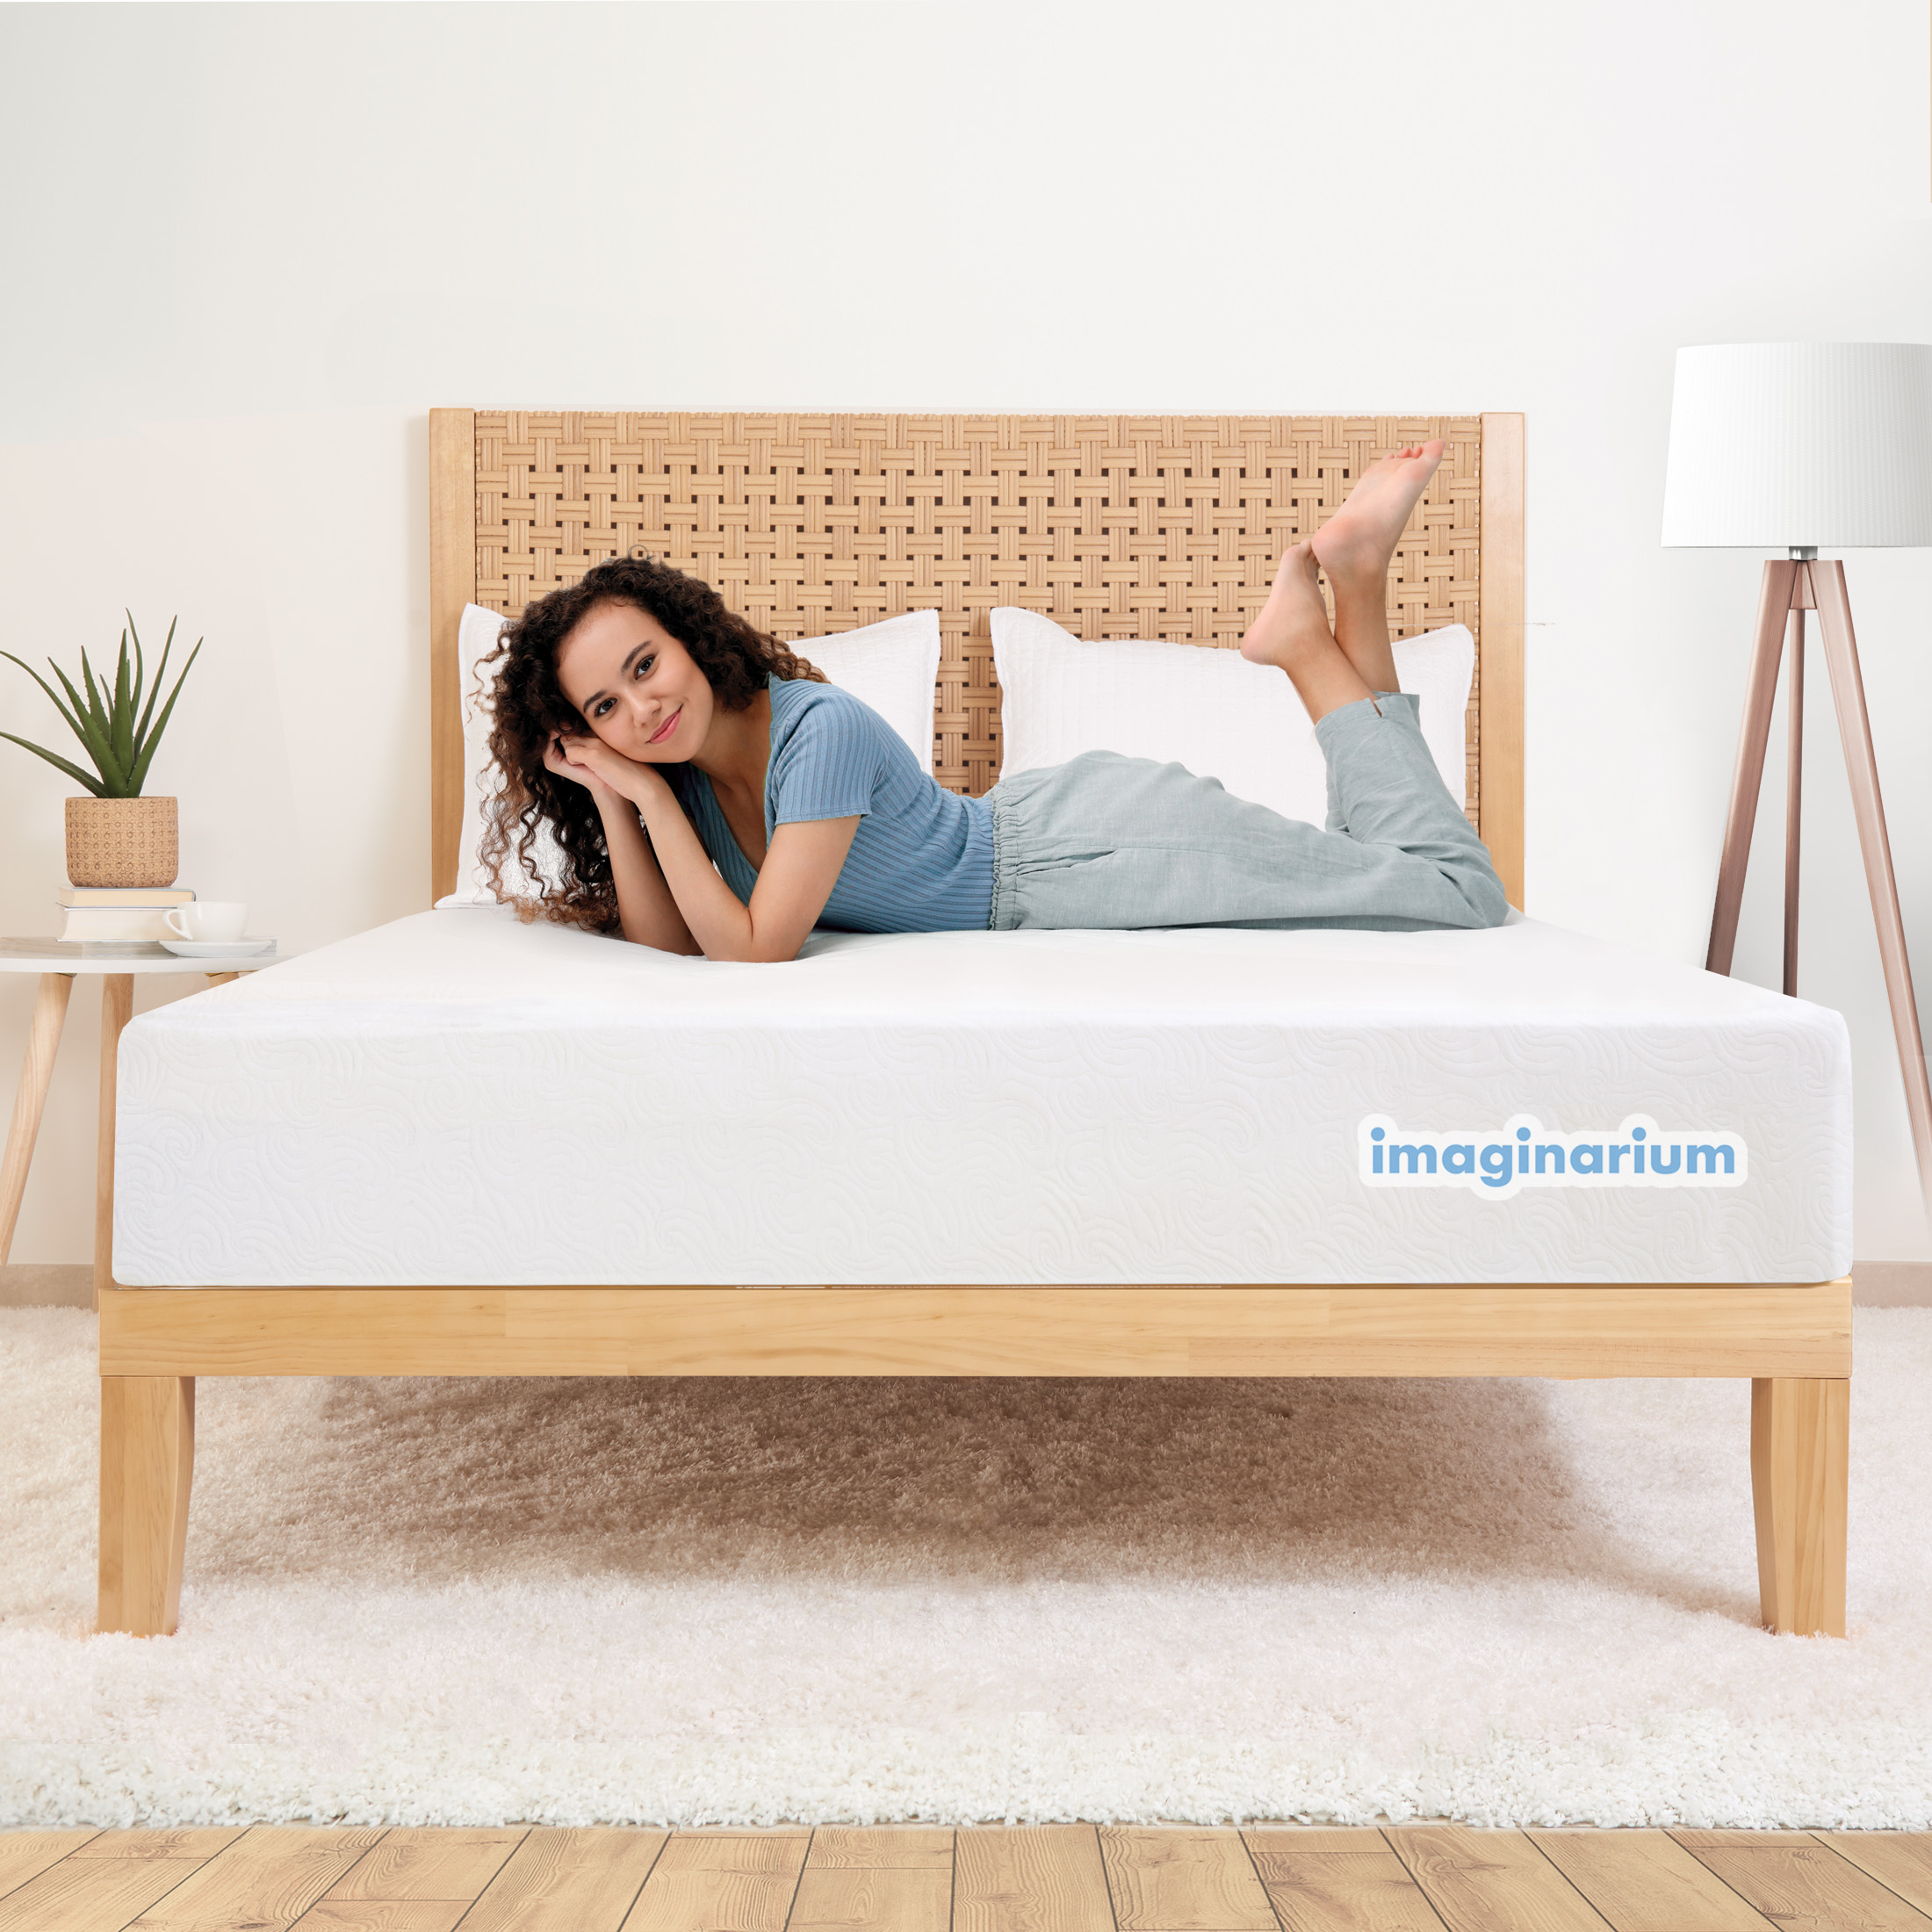 Imaginarium 10" Hybrid of Memory Foam and Coils Mattress with Antimicrobial Treated Cover, King - image 2 of 6